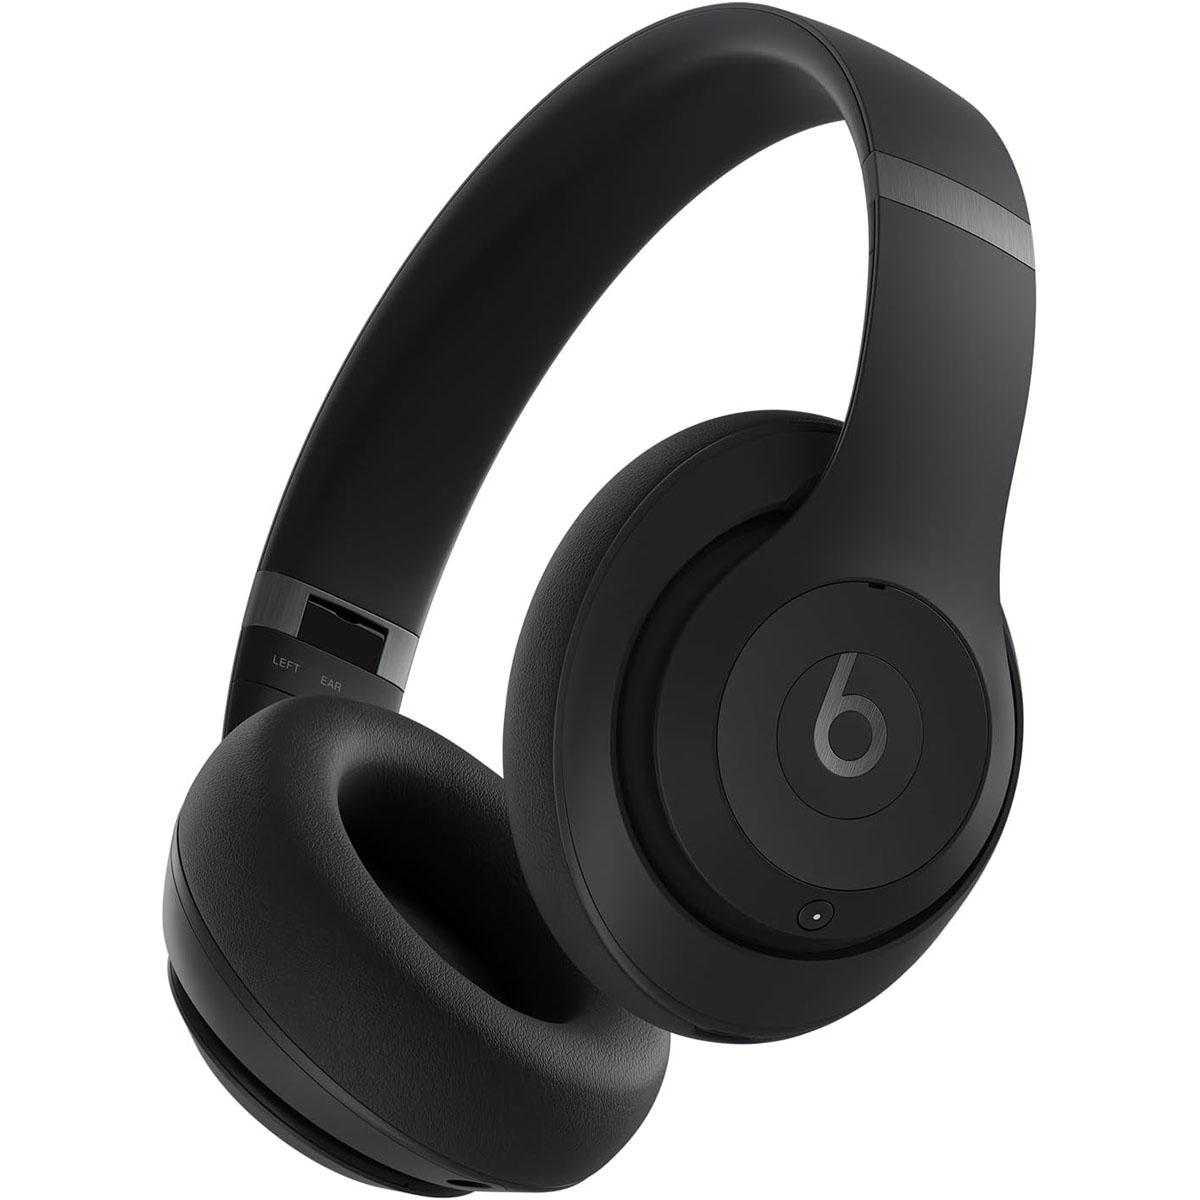 Beats Studio Pro Bluetooth Noise Cancelling Headphones for $179.95 Shipped